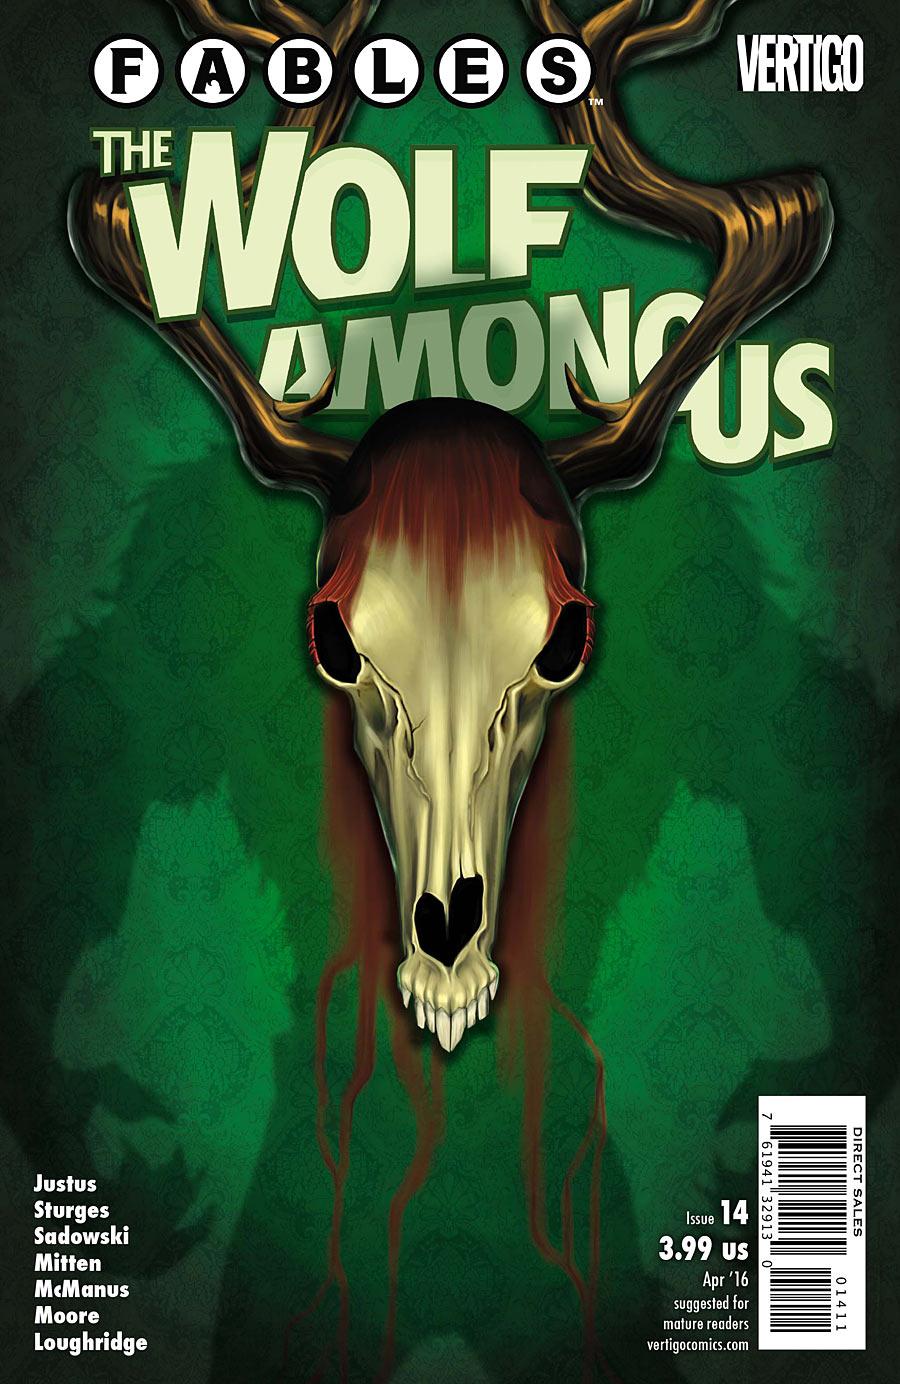 Fables: The Wolf Among Us Vol. 1 #14